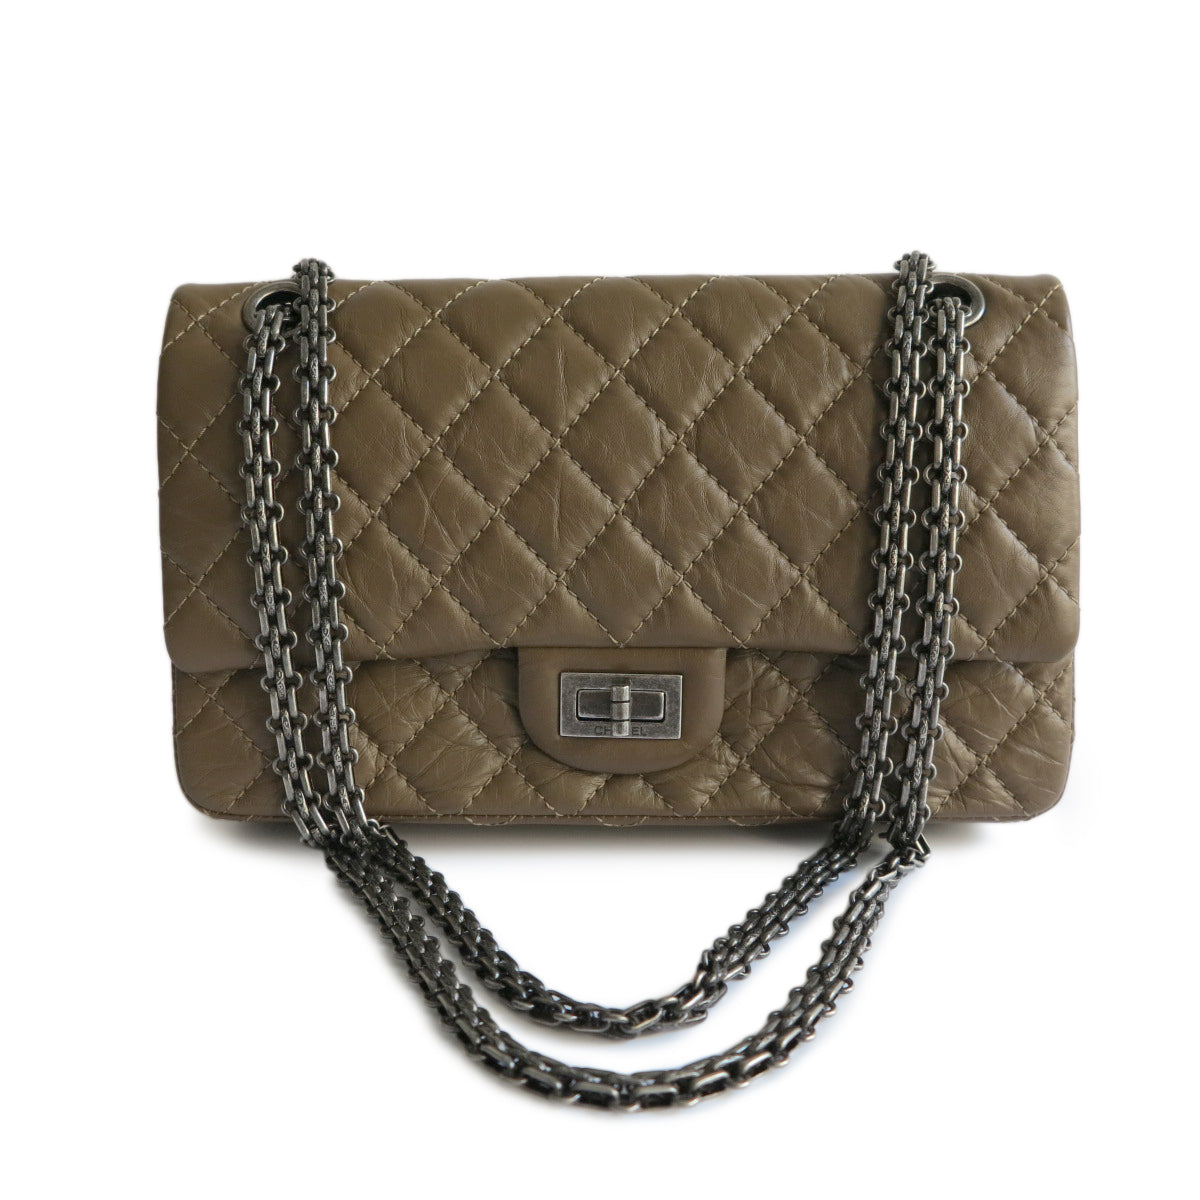 2.55 Reissue Flap Bag Size 225 in Olive Brown Aged